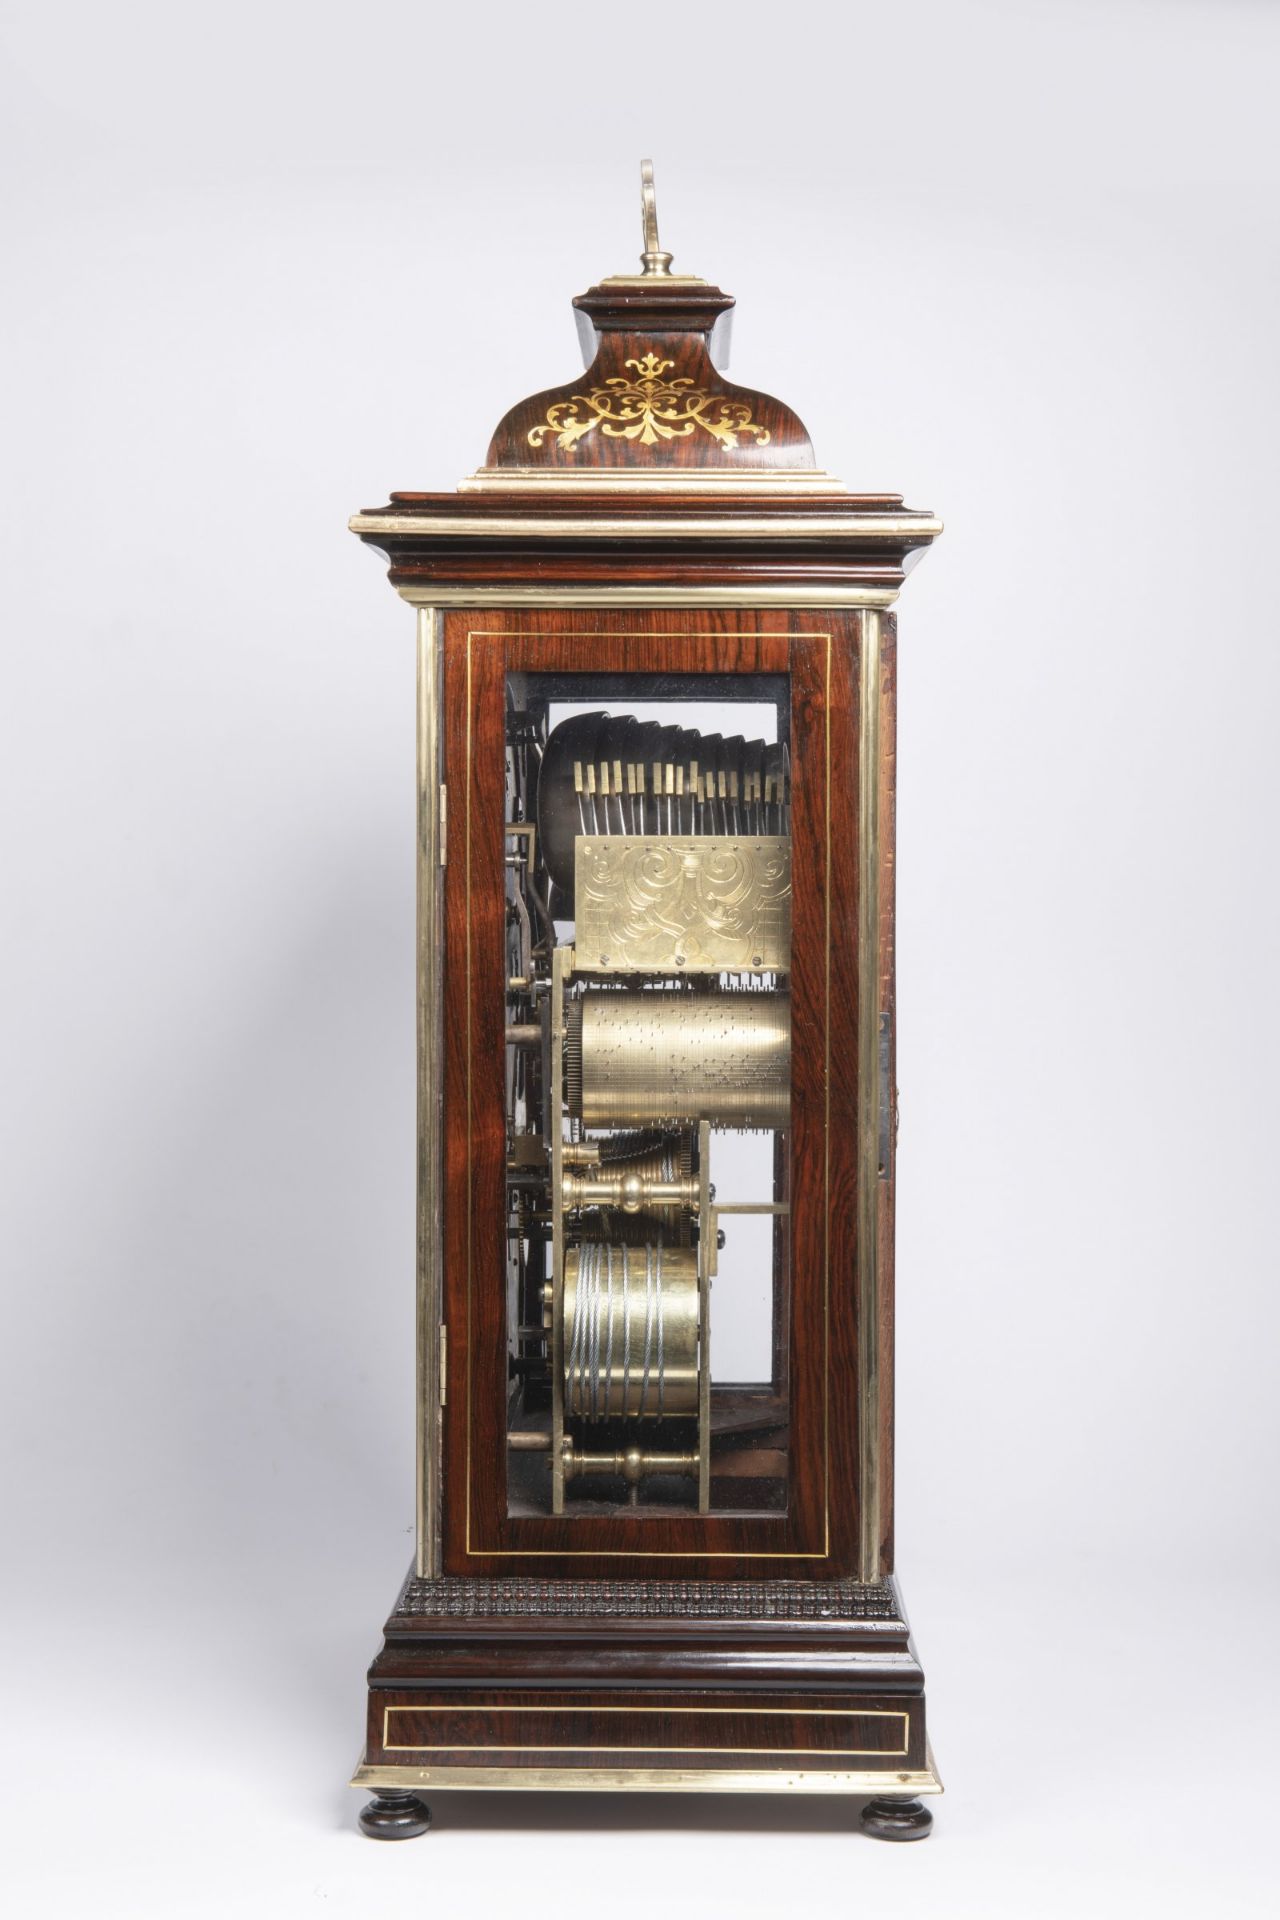 JACOB MEYER II. ???? - 1750: BAROQUE TABLE CLOCK WITH CARILLON Ca. 1740 Rosewood, gilt brass, - Image 3 of 3